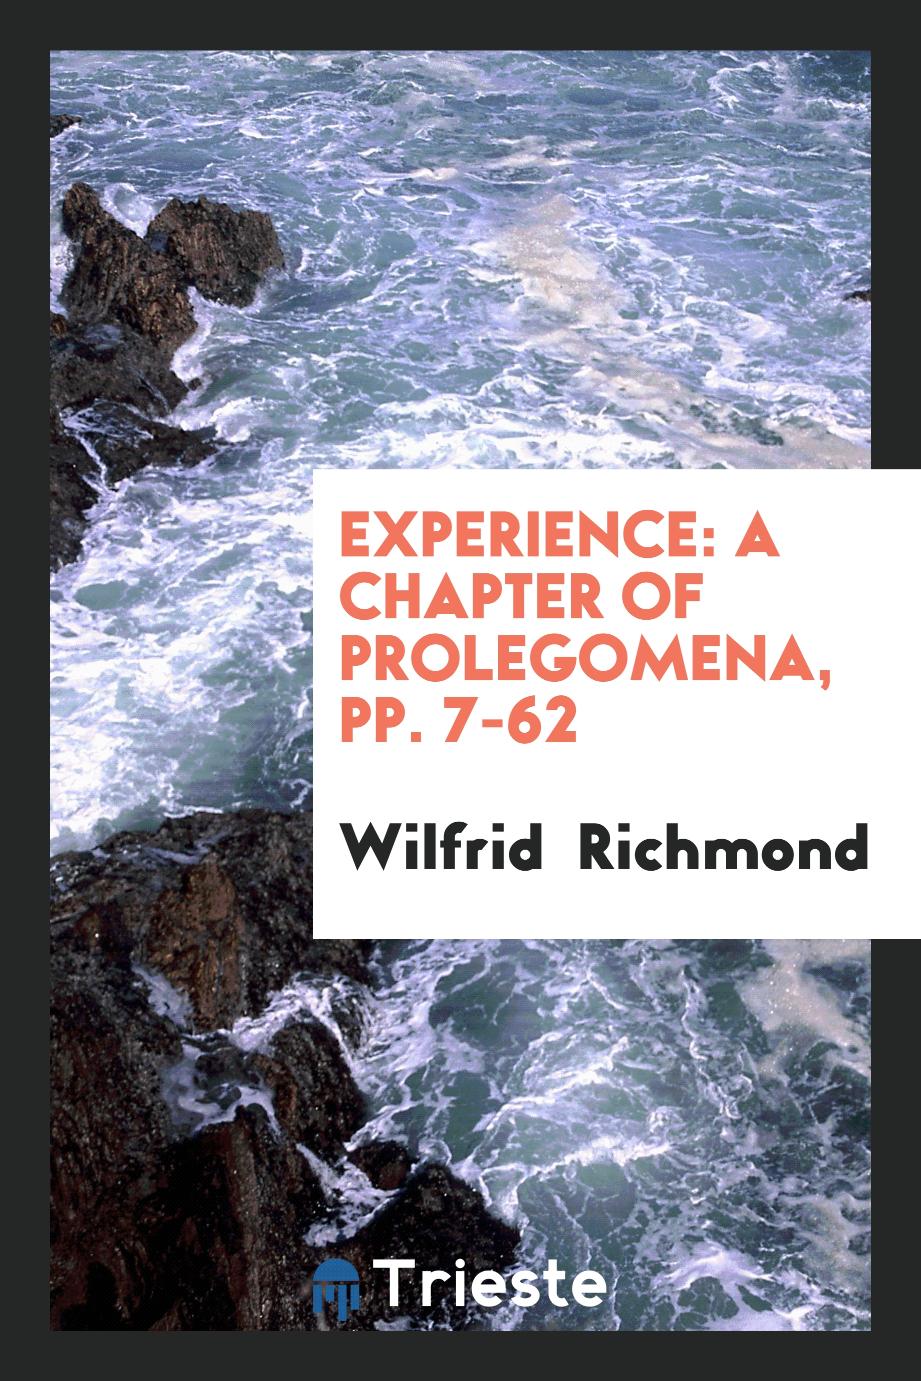 Experience: A Chapter of Prolegomena, pp. 7-62